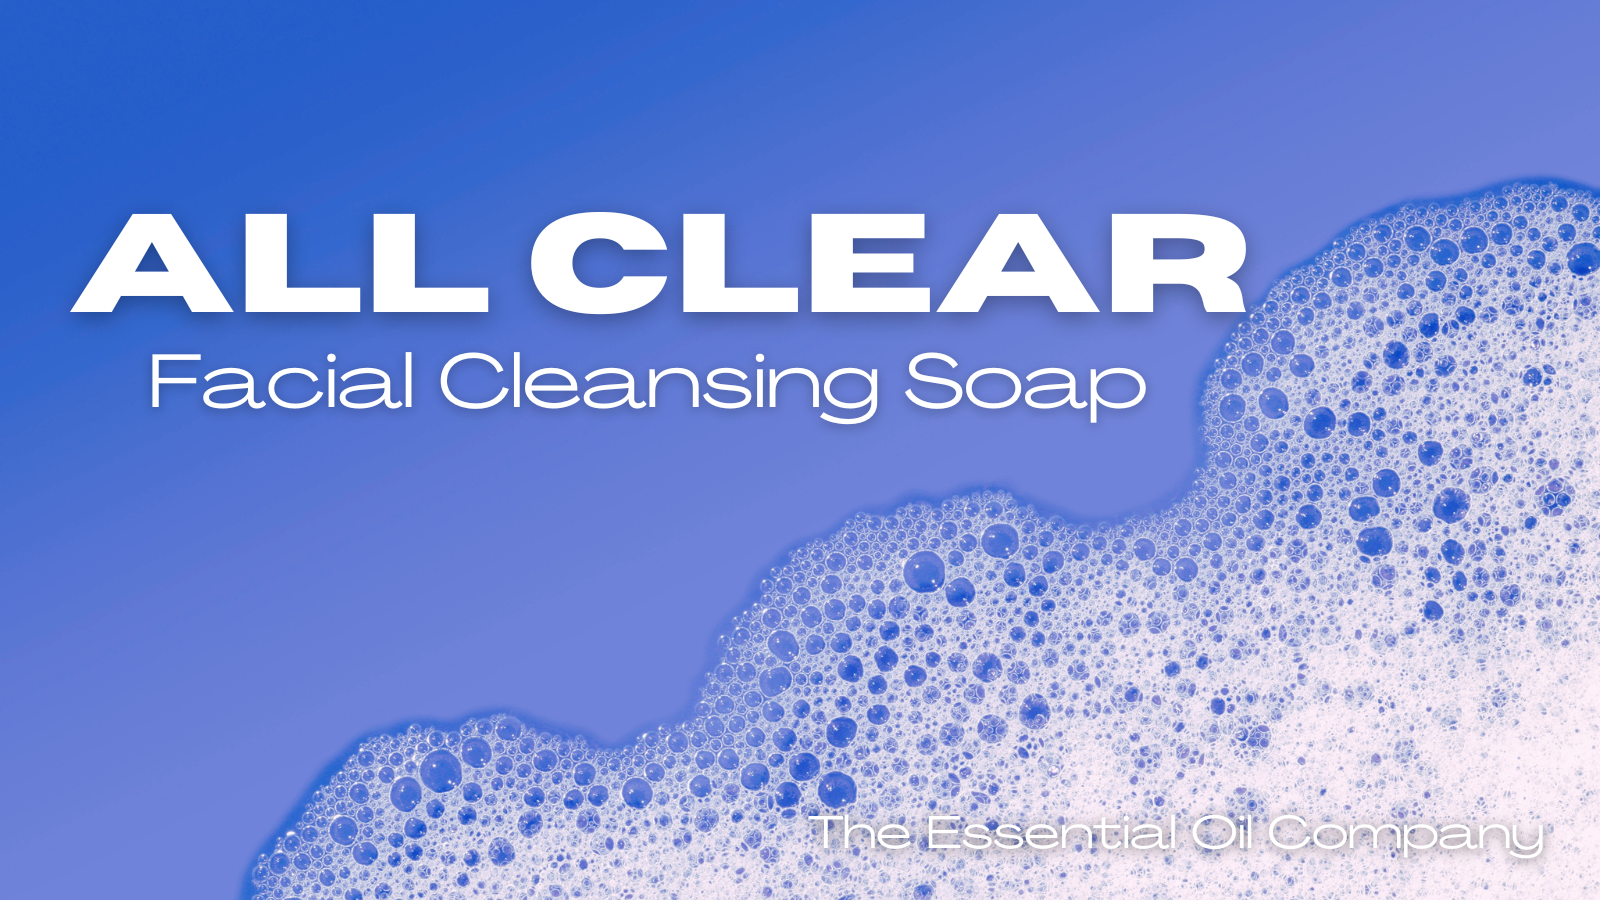 Facial cleansing soap